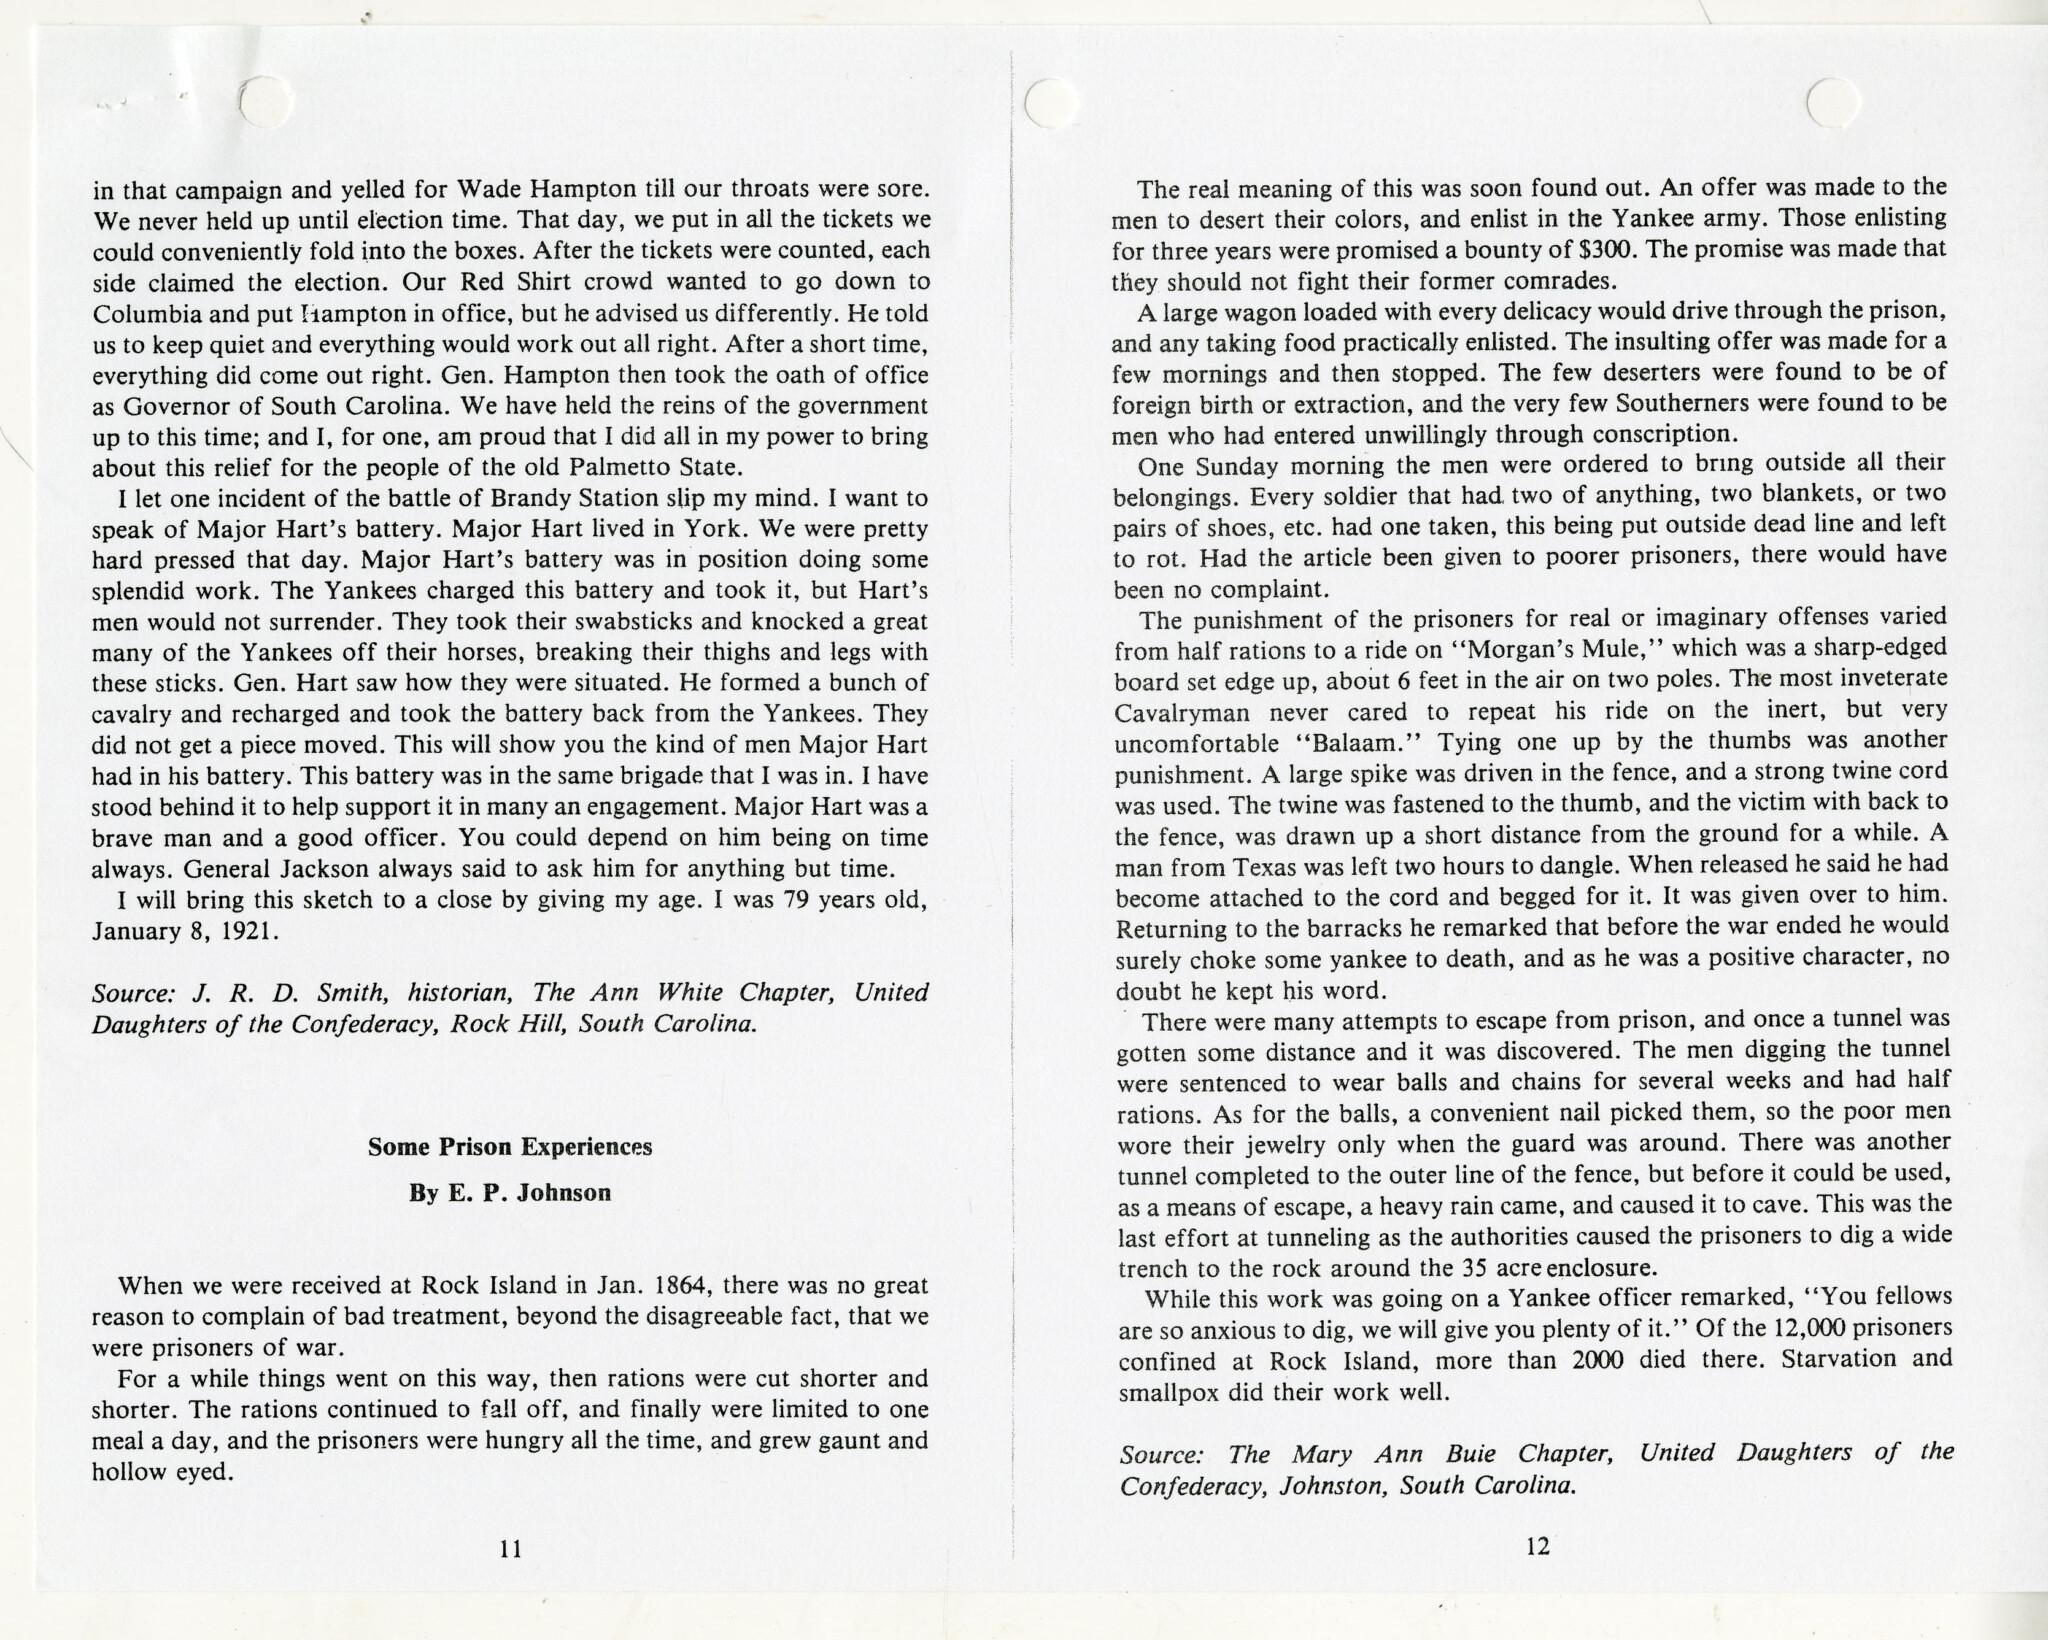 HISTORY OF THE WAR AND THE LOCAL KKK - Wm. B. White Collection - WU Pettus Archives p. 3